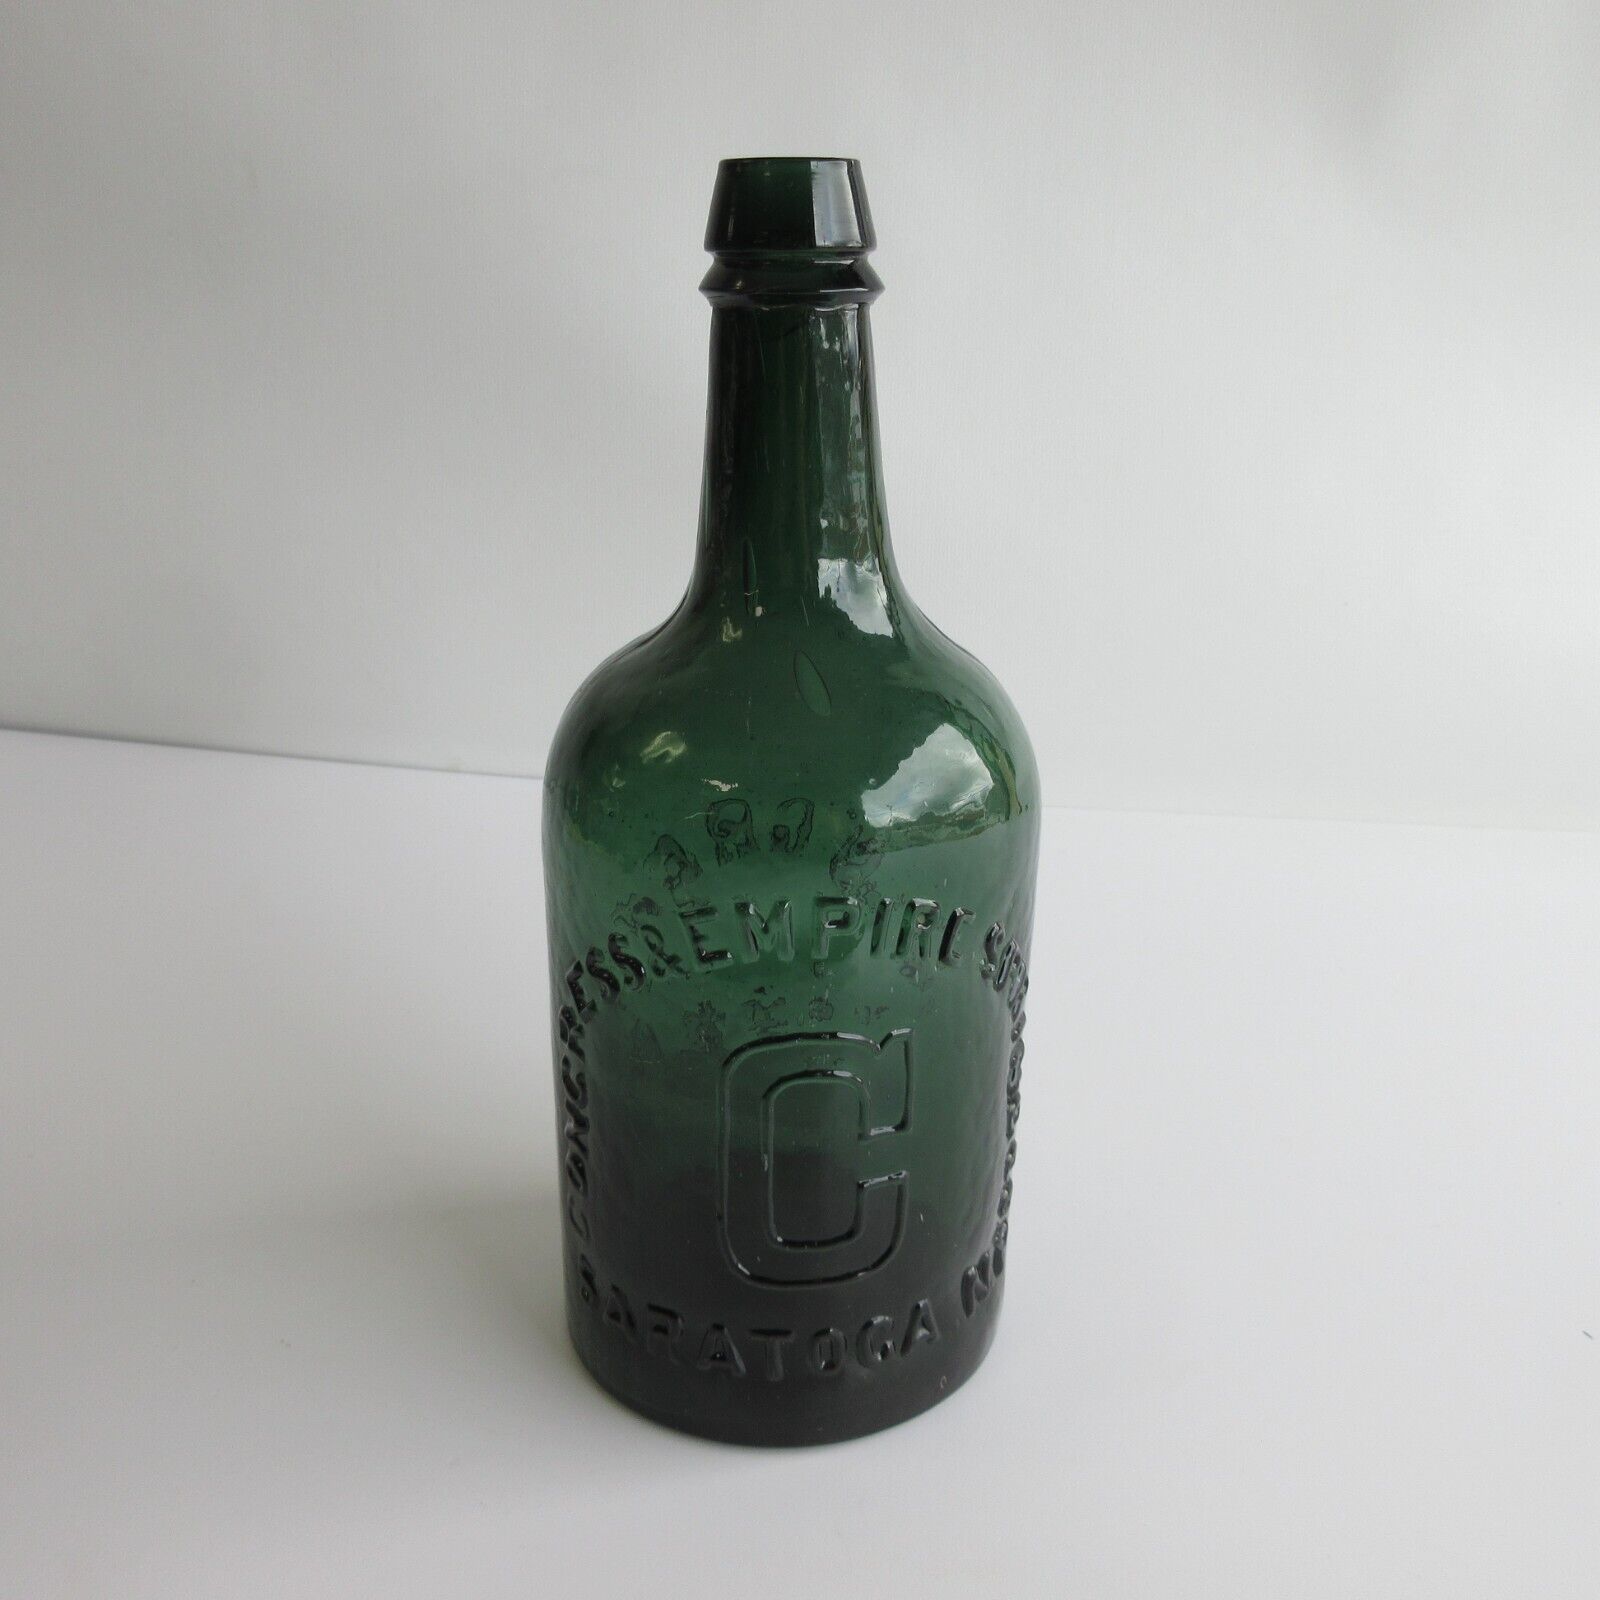 Congress Empire Spring Co Saratoga NY Embossed Green Glass Water Bottle